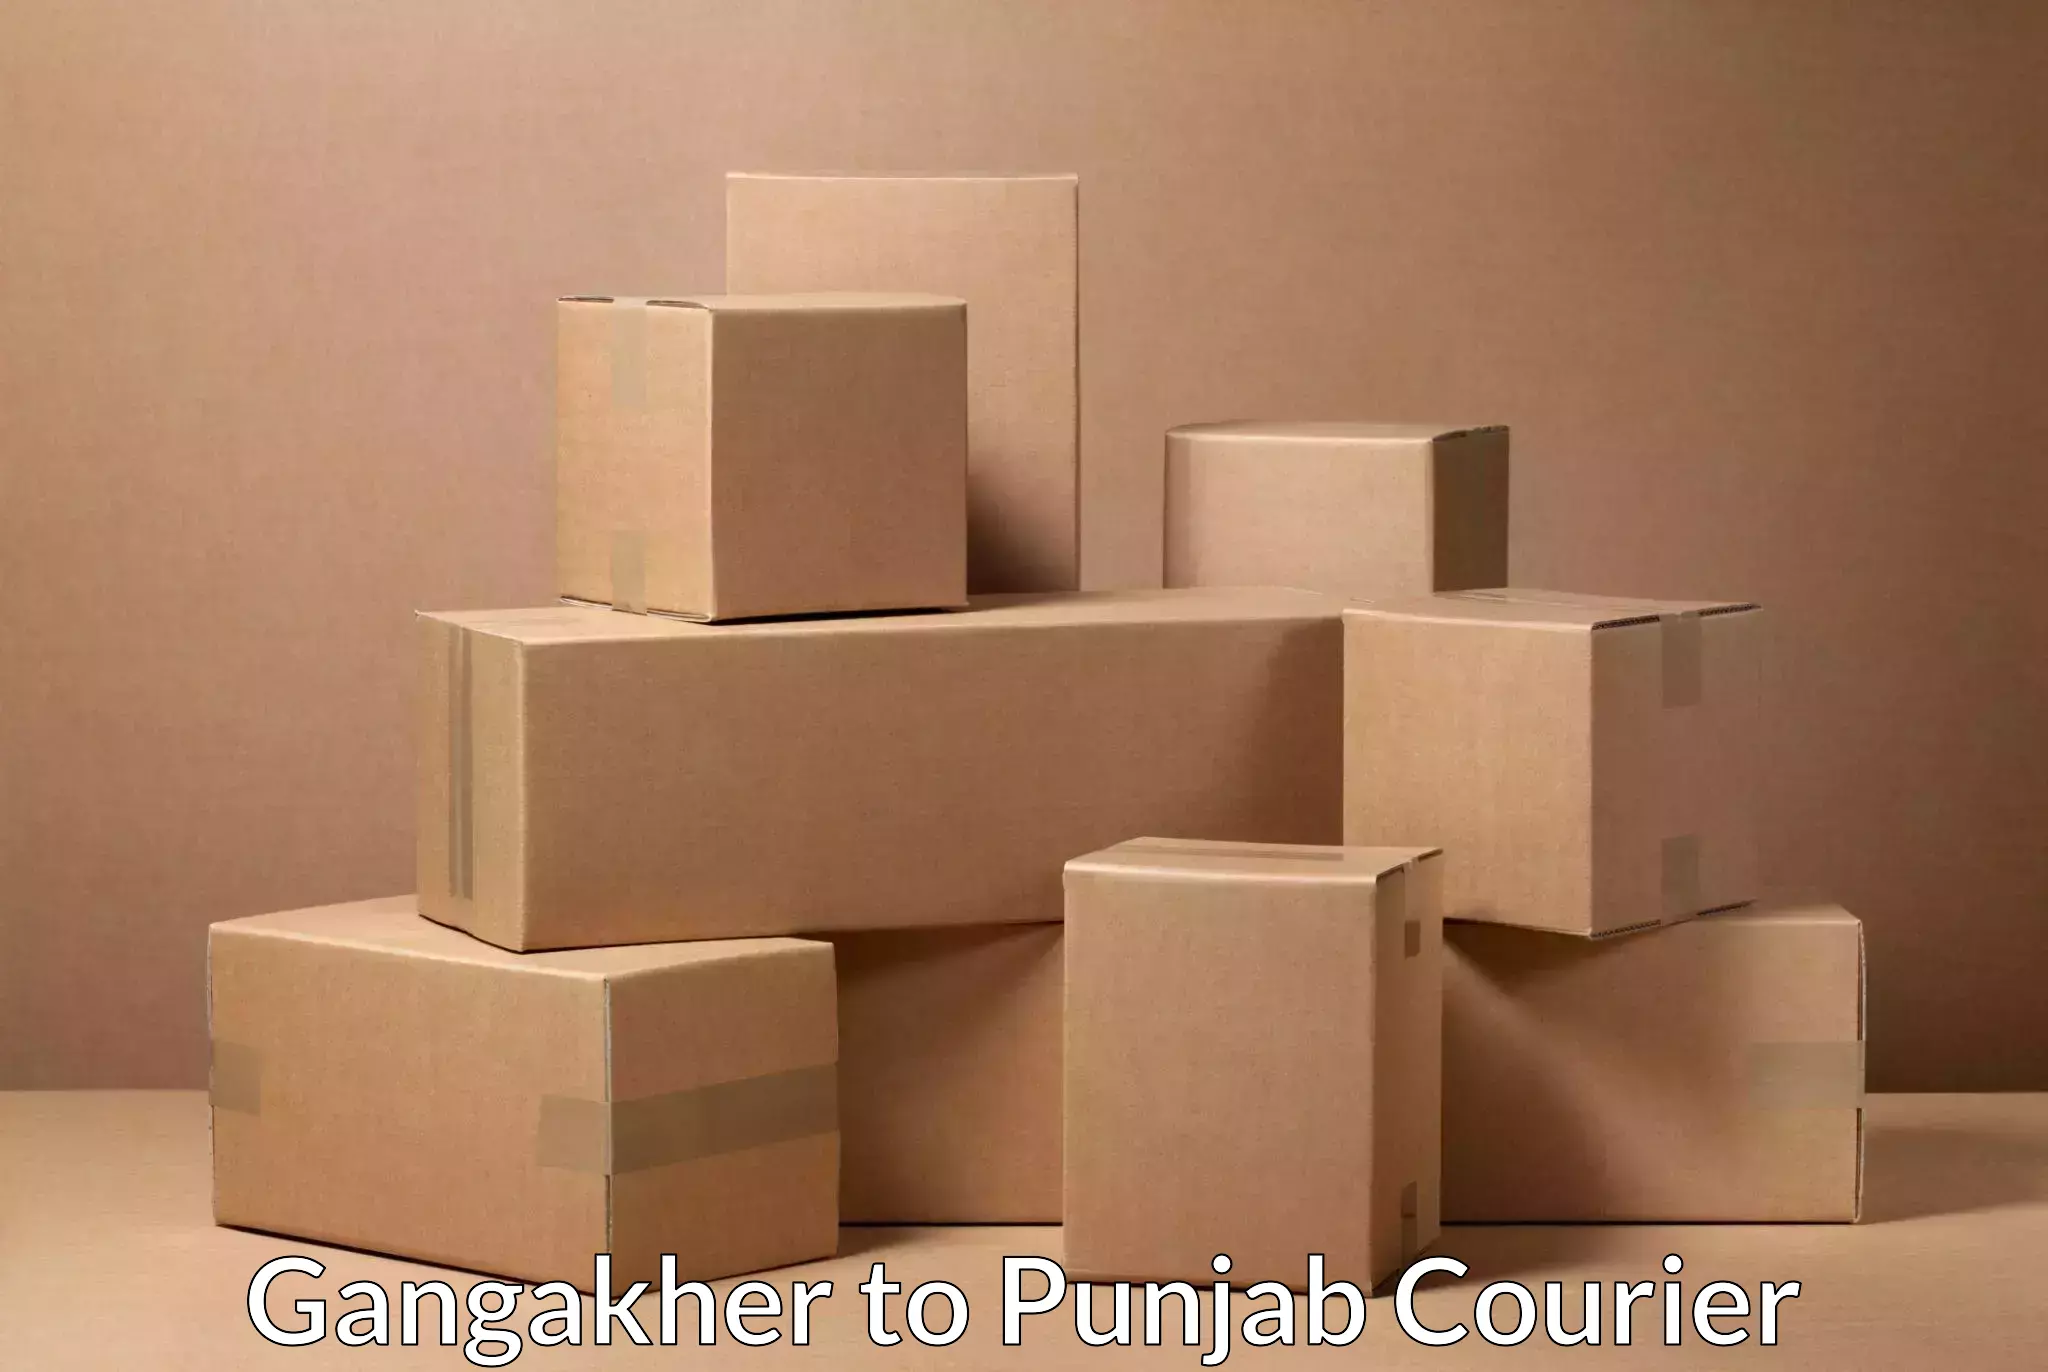 Reliable courier services in Gangakher to Punjab